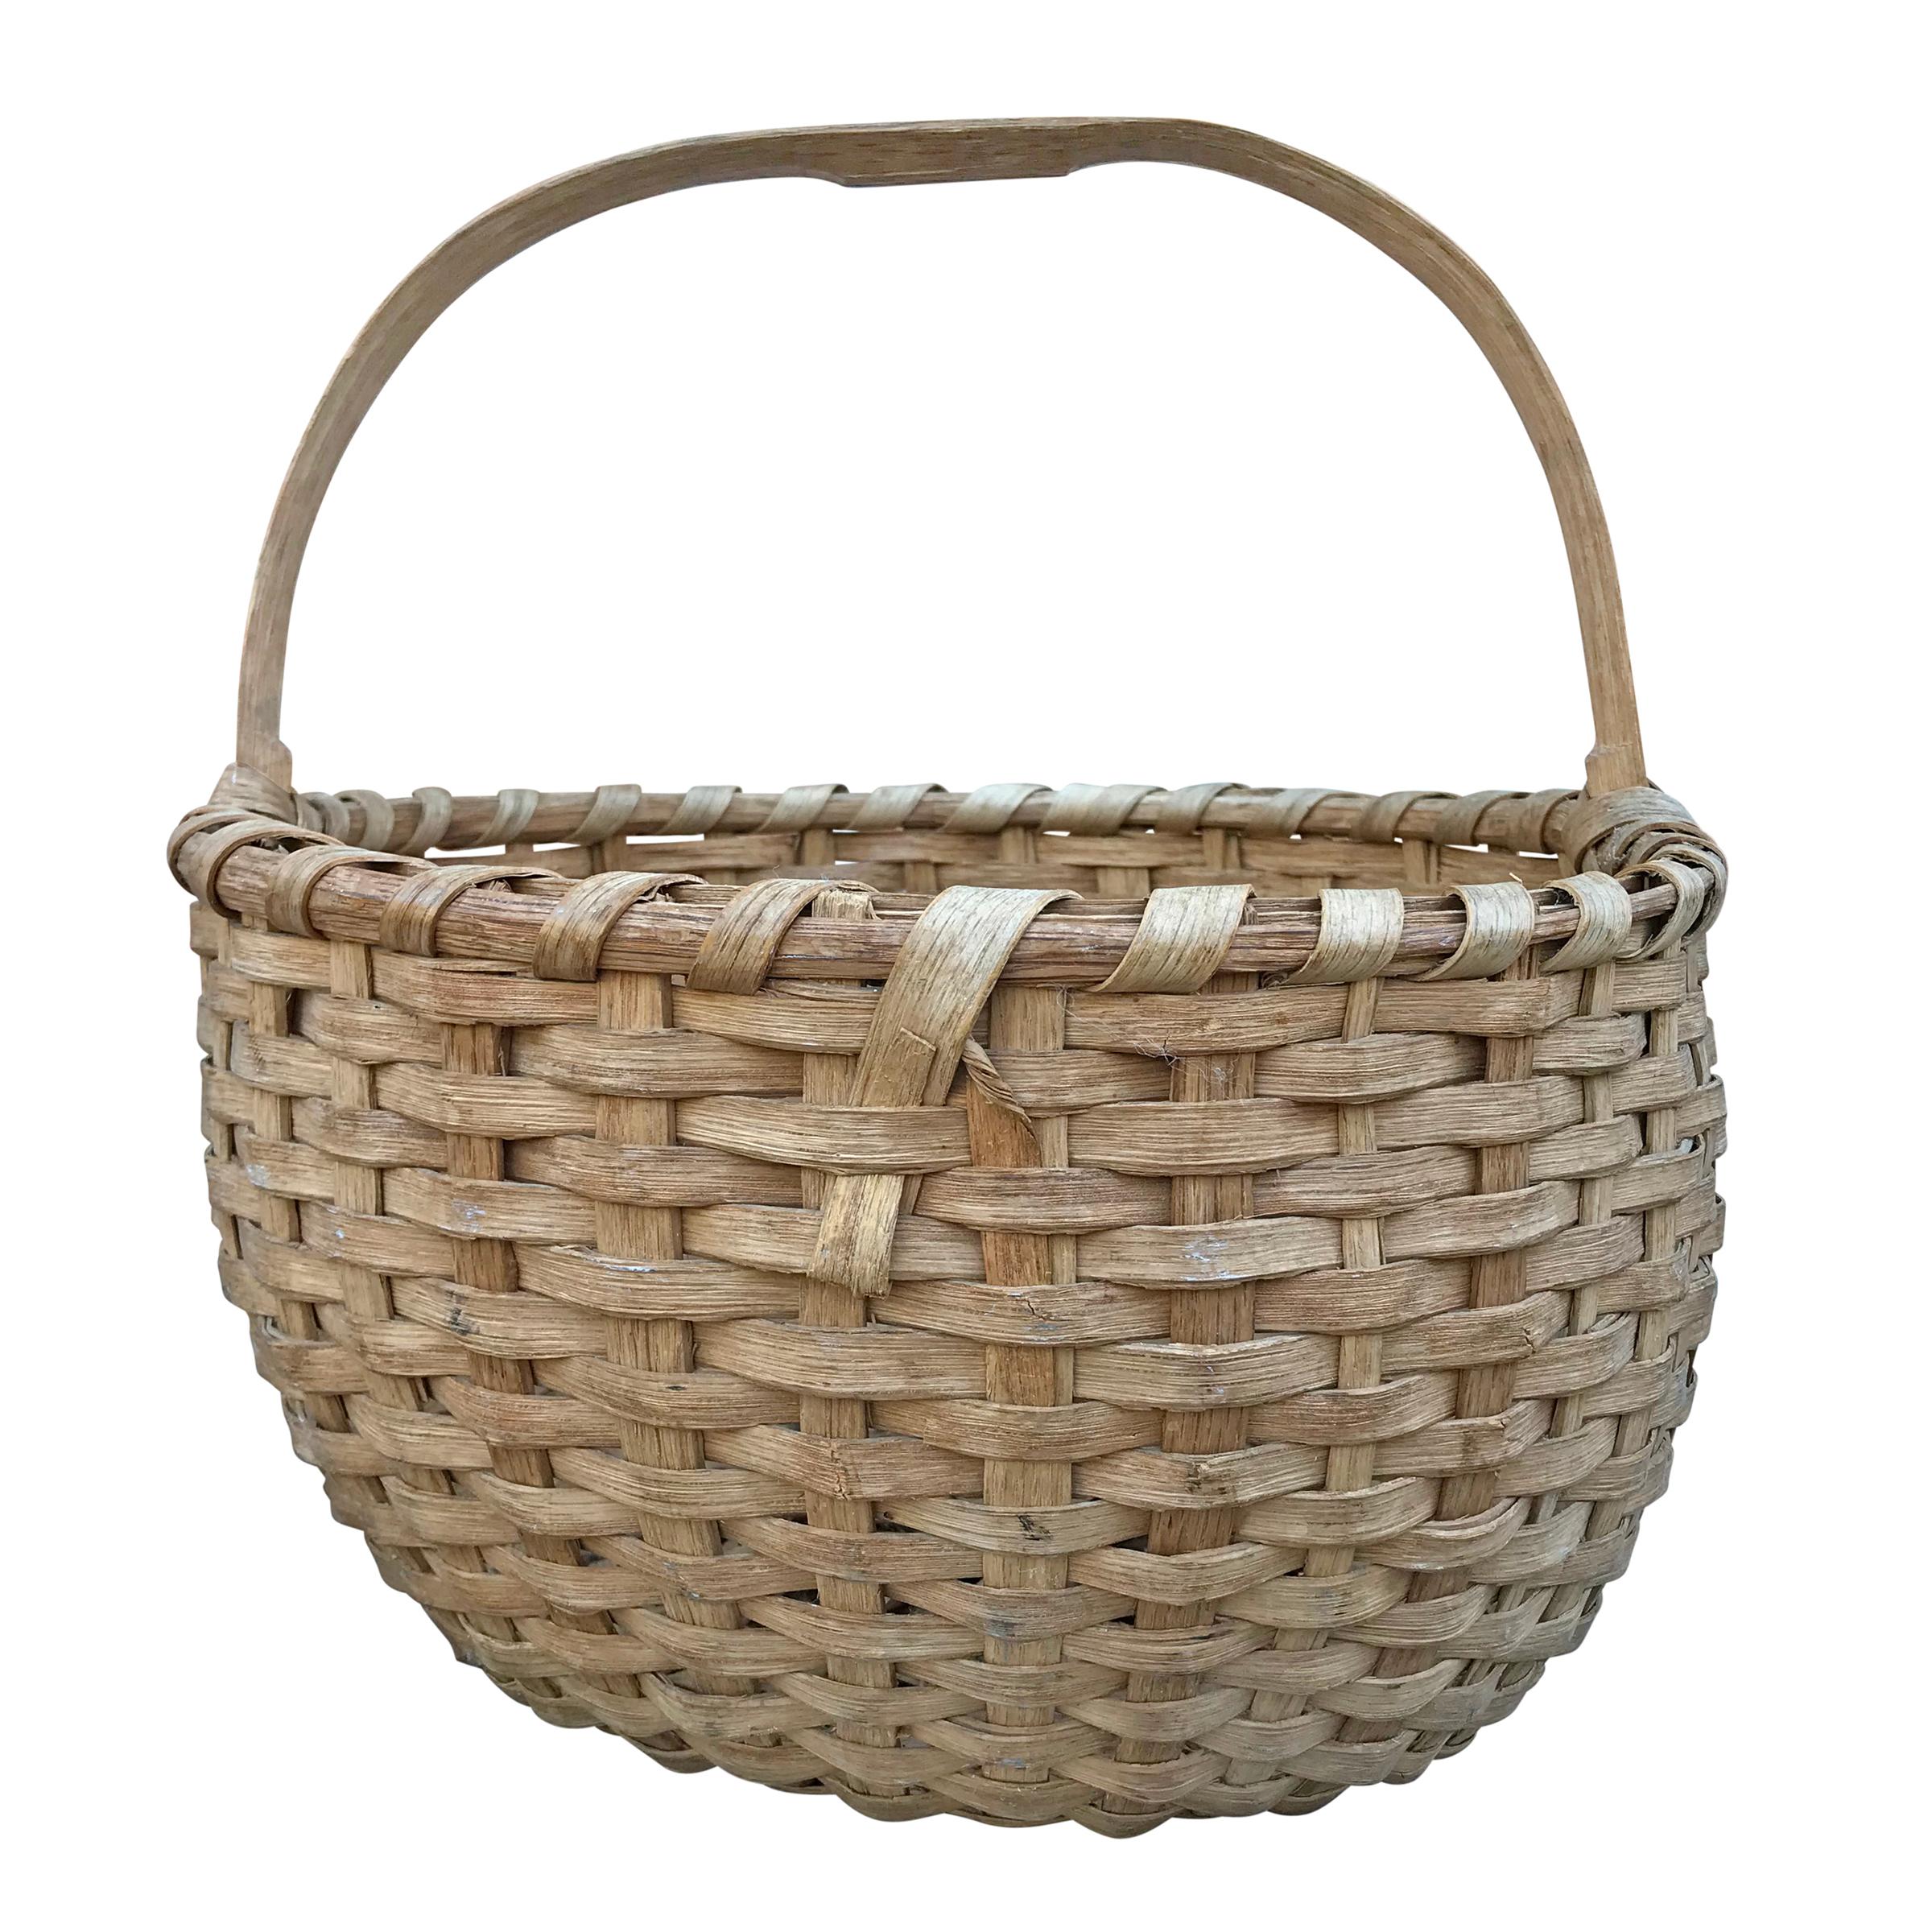 A wonderful early 20th century hand-woven oak splint gathering basket with a single bent oak handle, a double banded rim, and a lovely wonky shape. Found in Wisconsin.